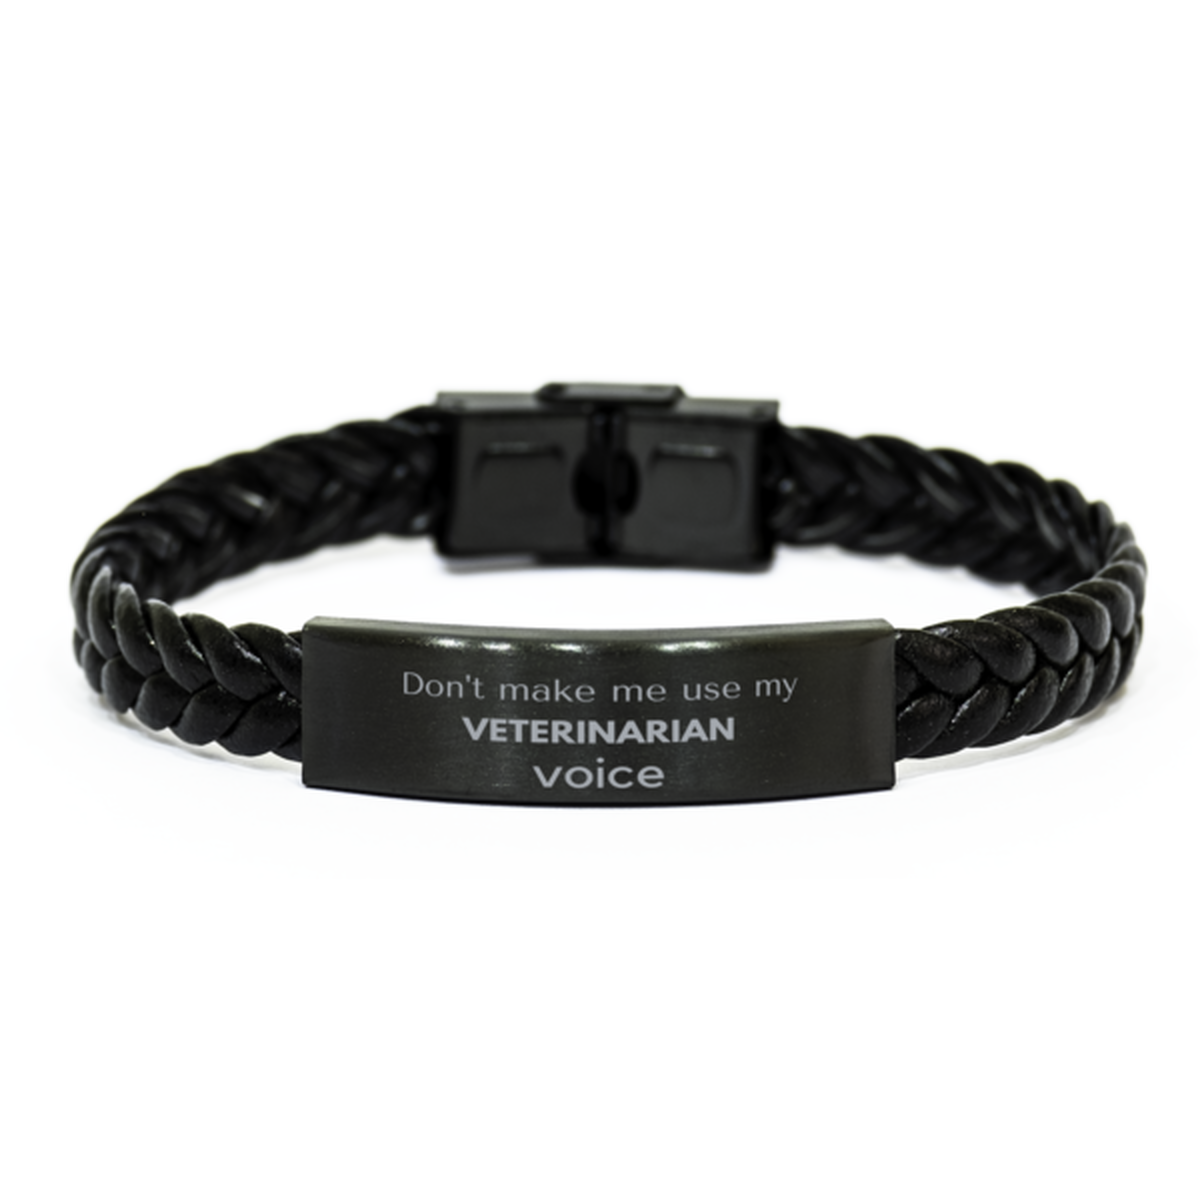 Don't make me use my Veterinarian voice, Sarcasm Veterinarian Gifts, Christmas Veterinarian Braided Leather Bracelet Birthday Unique Gifts For Veterinarian Coworkers, Men, Women, Colleague, Friends